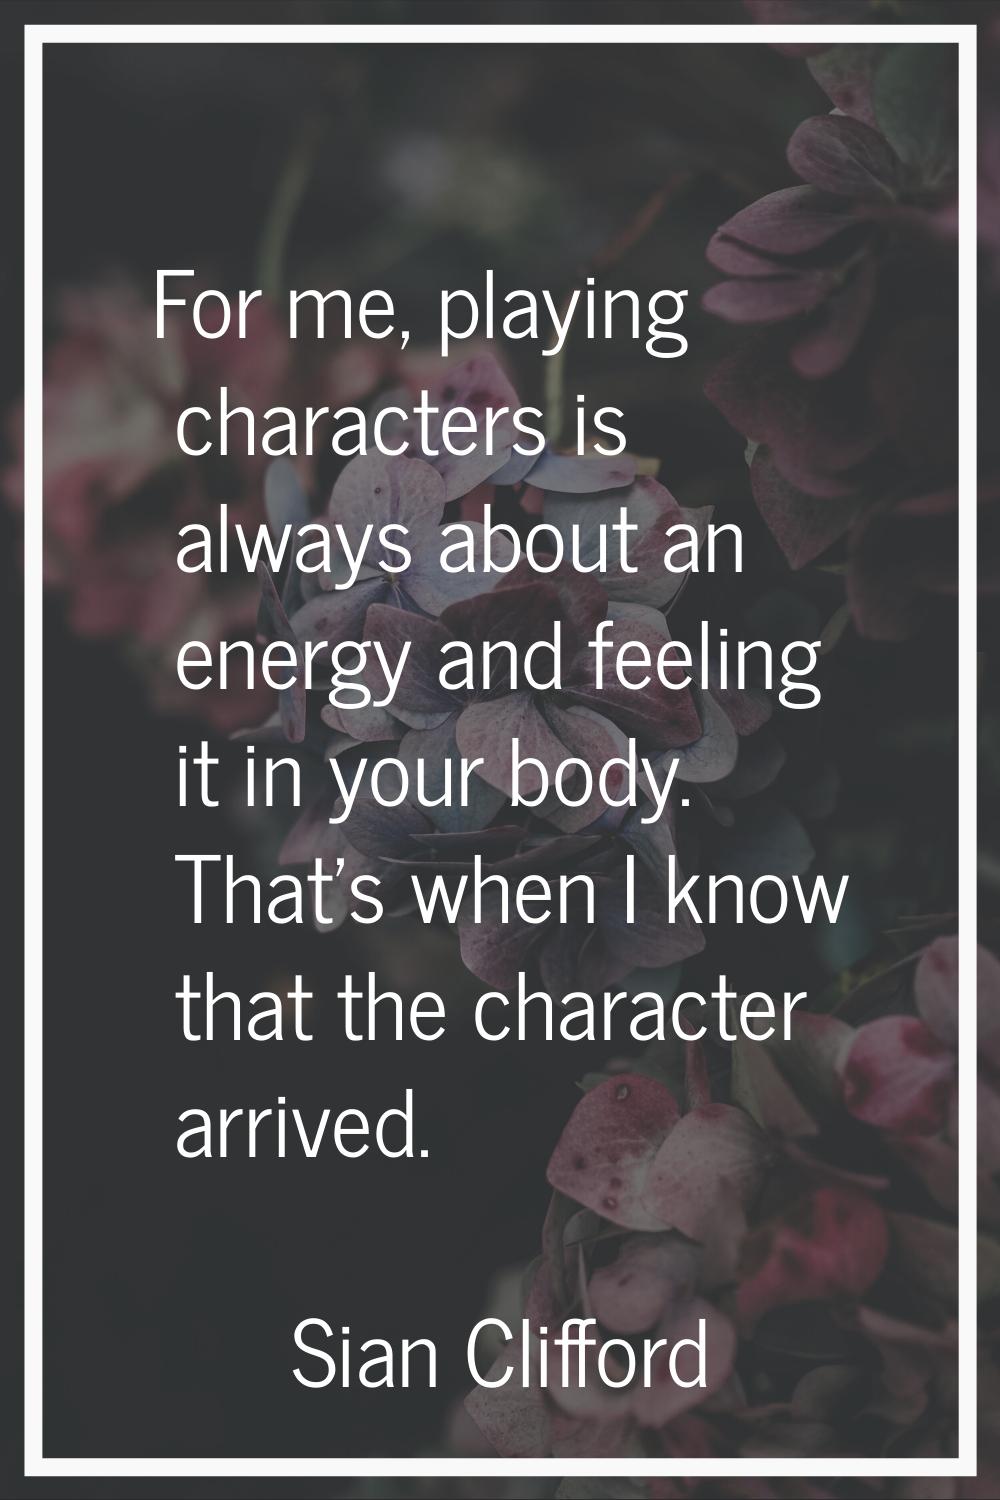 For me, playing characters is always about an energy and feeling it in your body. That's when I kno